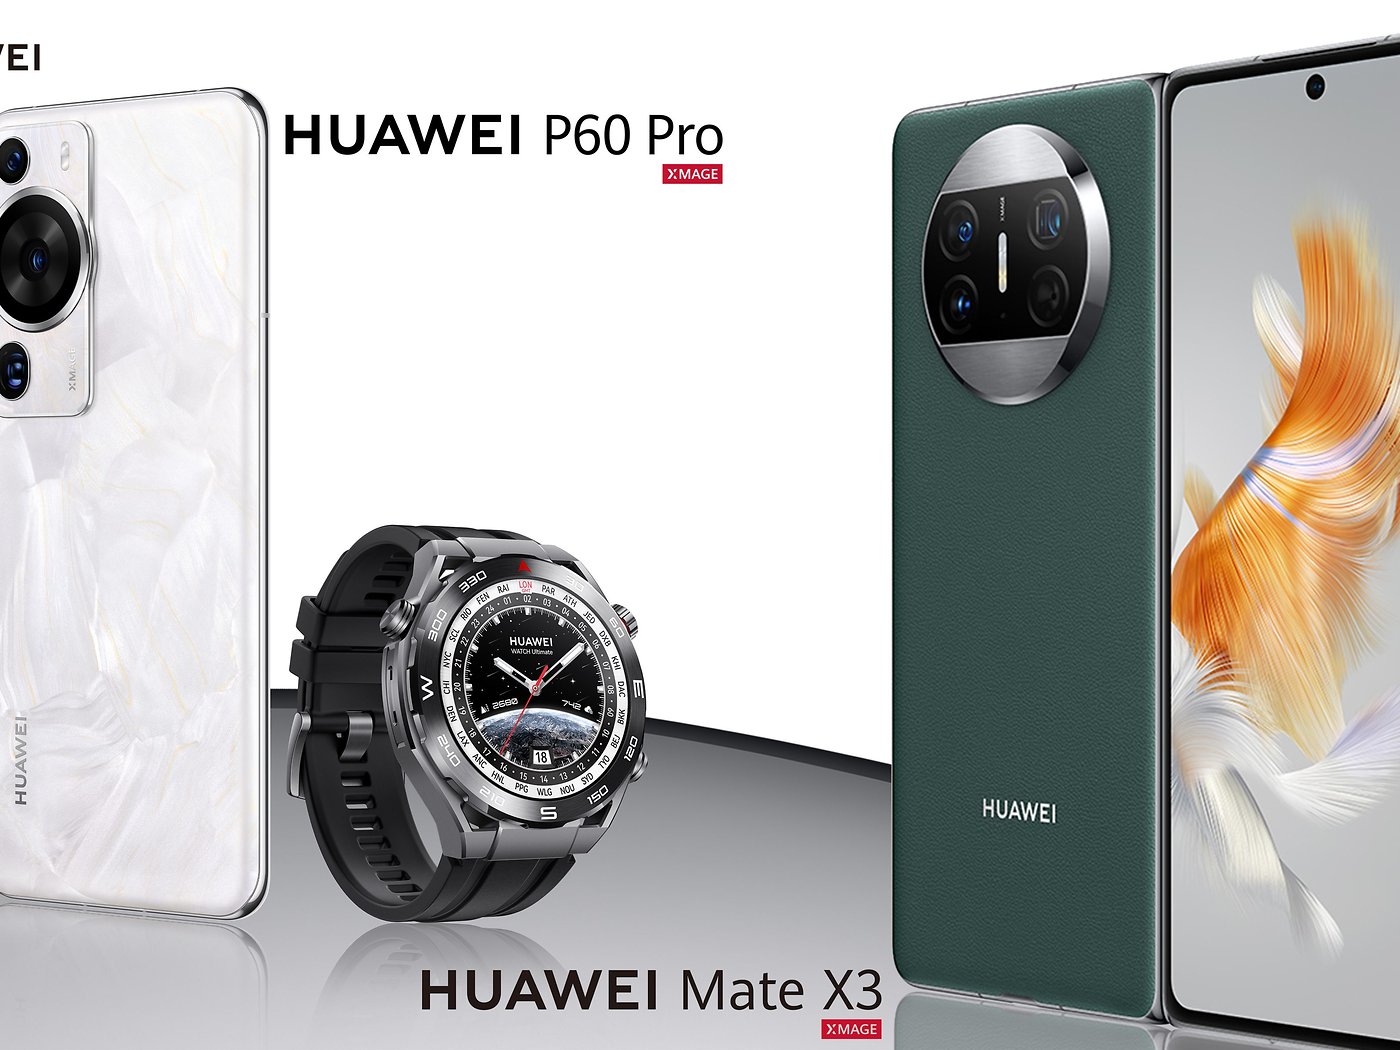 Huawei Reveals Its Newest Stars: The P60 Pro and Mate X3